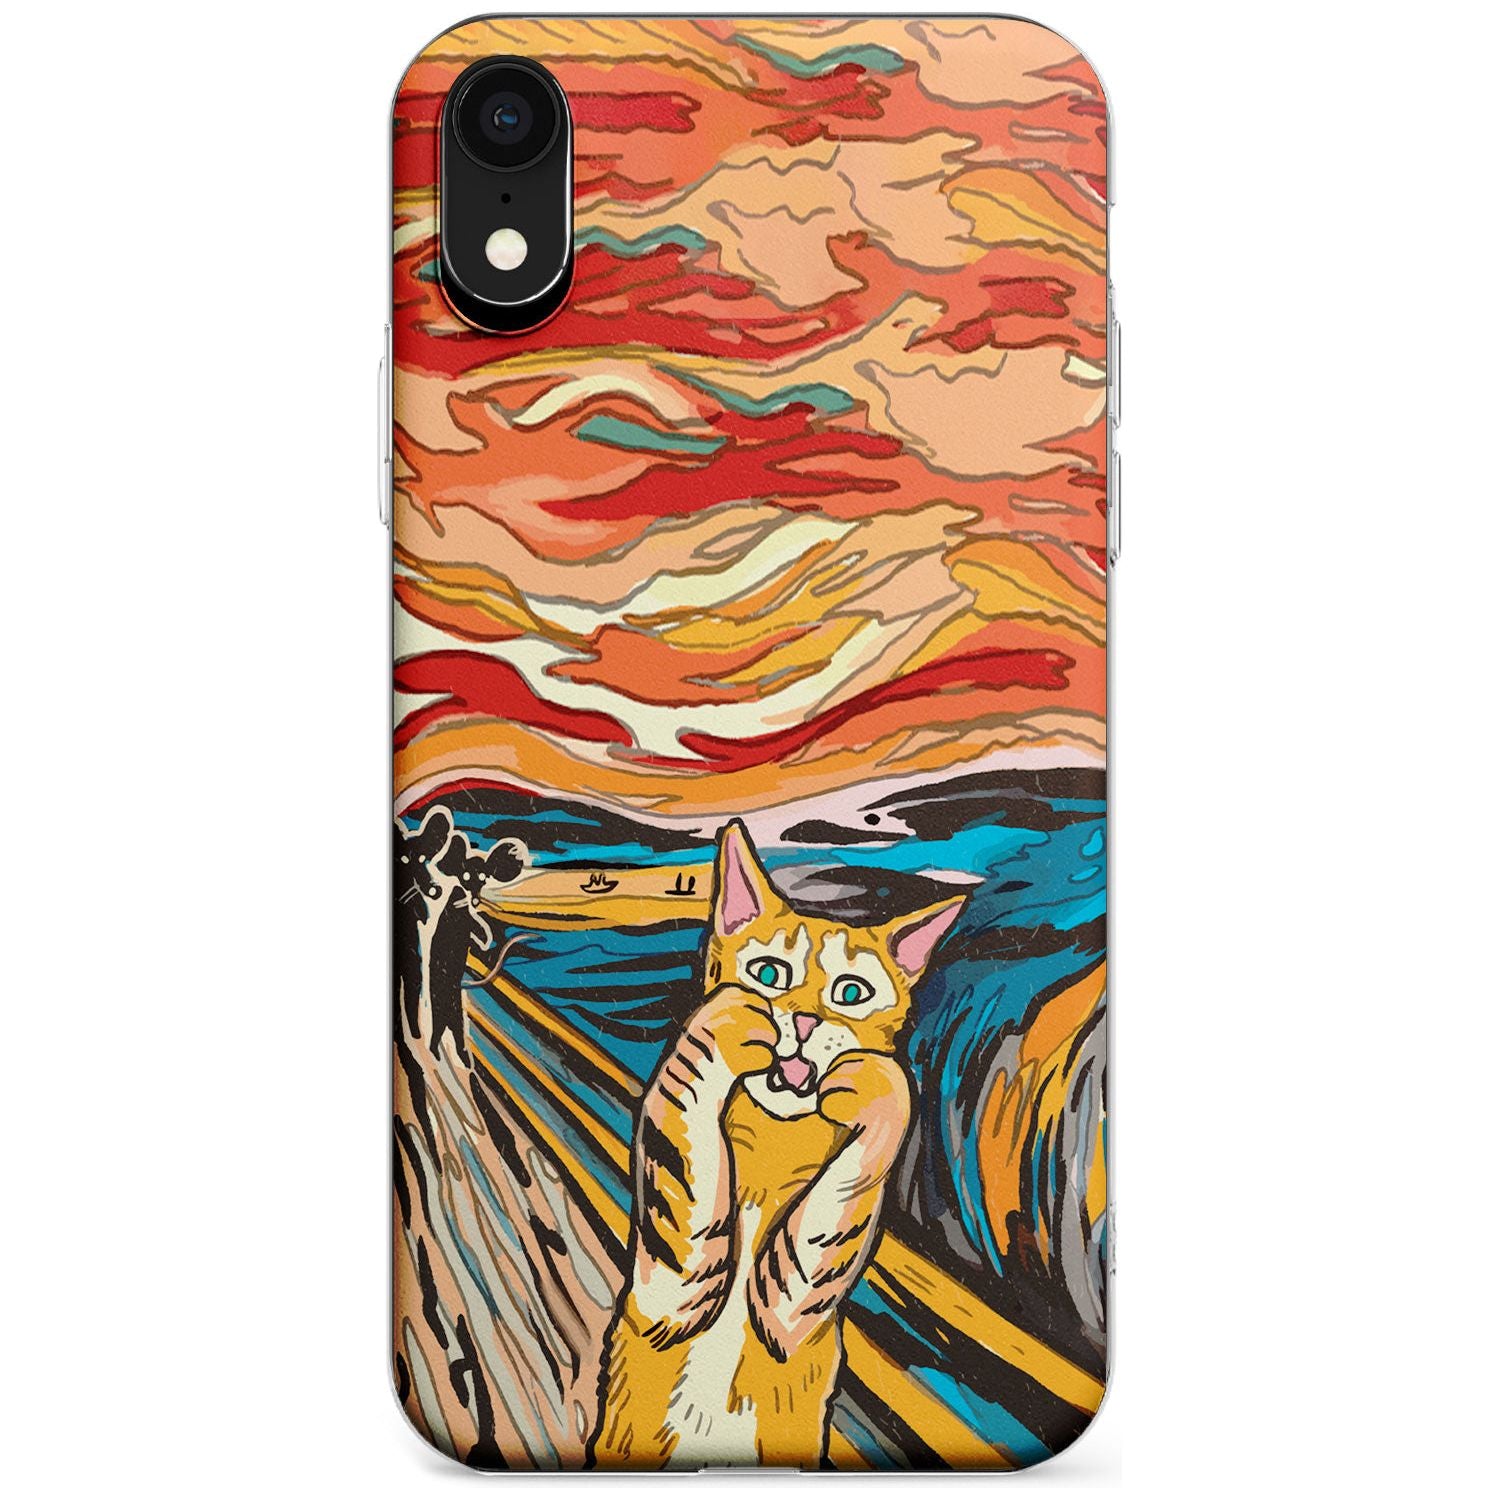 The Bark Phone Case for iPhone X XS Max XR